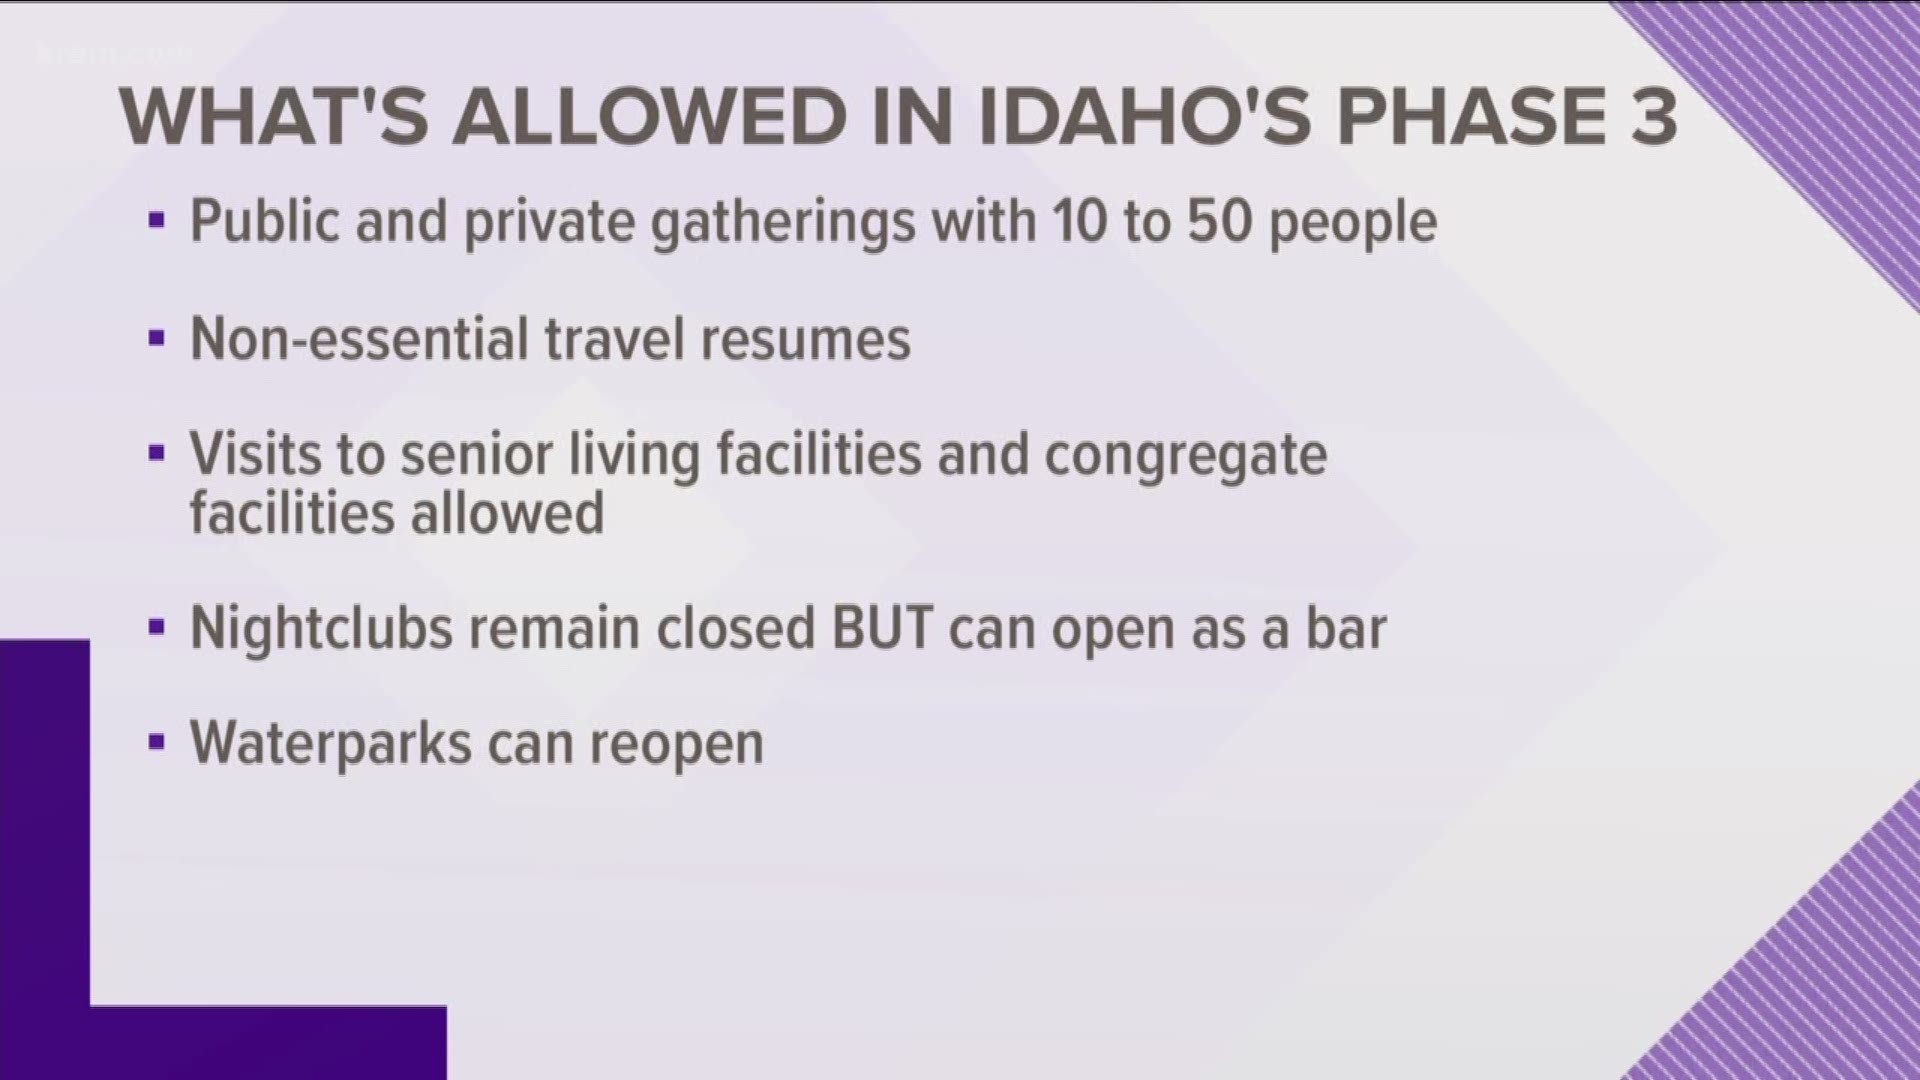 Bars and movie theaters in Idaho can reopen under Stage 3 of the state's plan. Non-essential travel is also allowed.